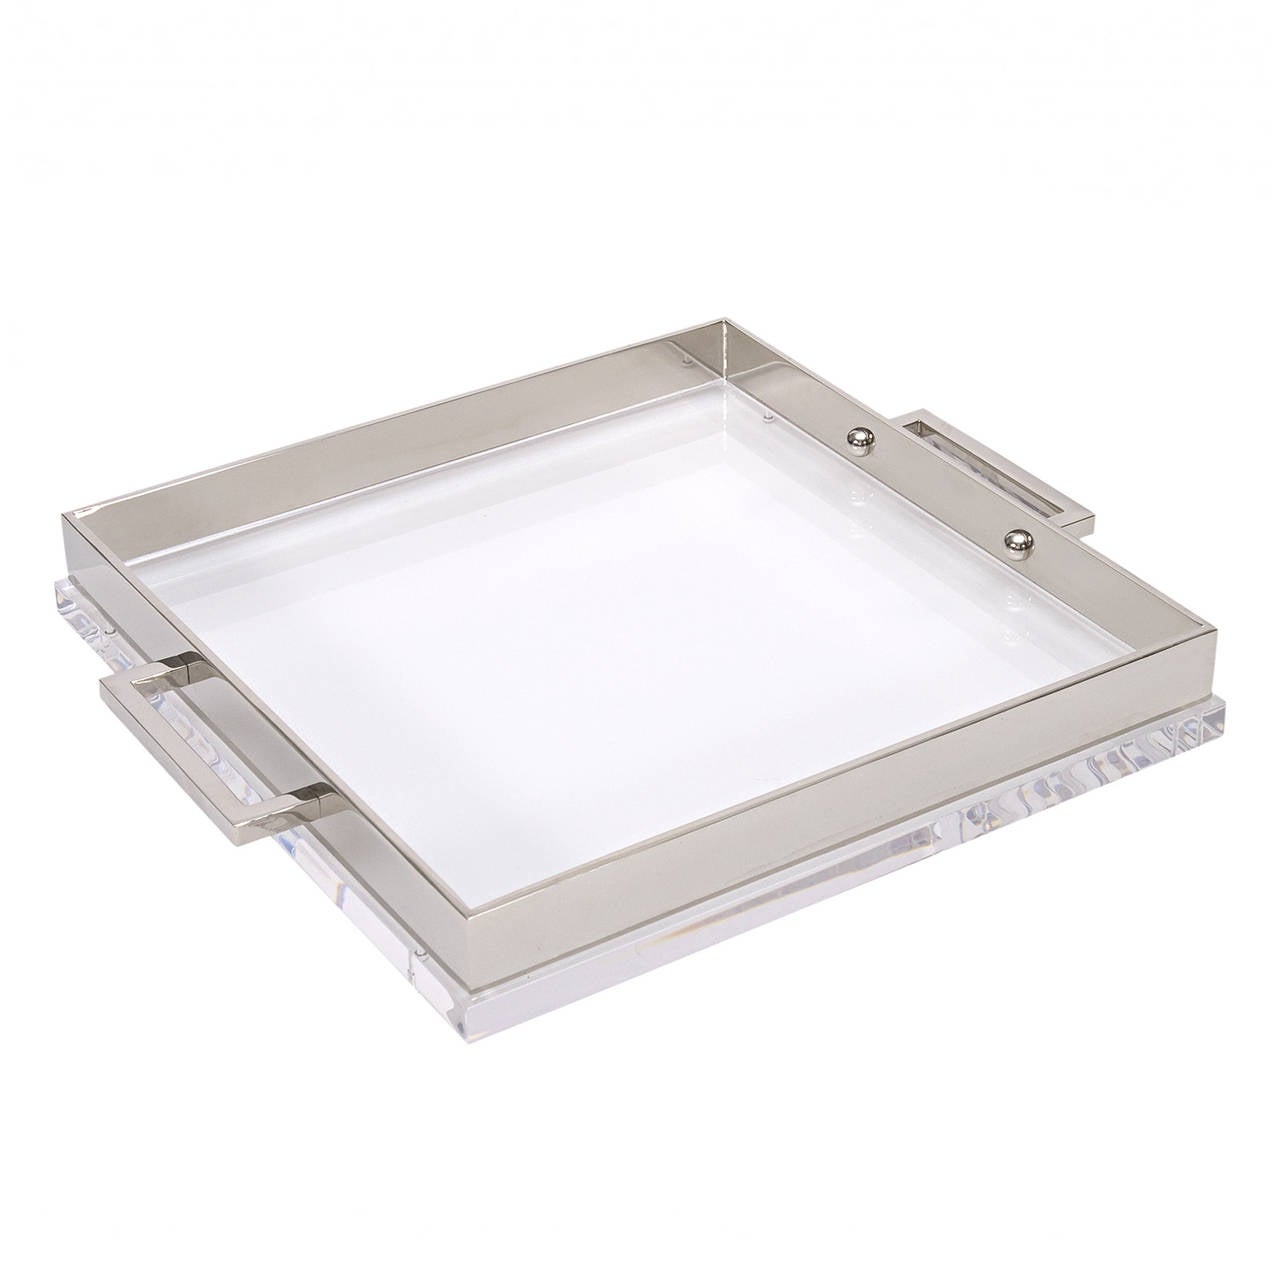 Beautiful tray.
Pure acrylic and polished nickel.
Additional sizes available and also custom.
Designed by Michael Dawkins (dims include handles.)